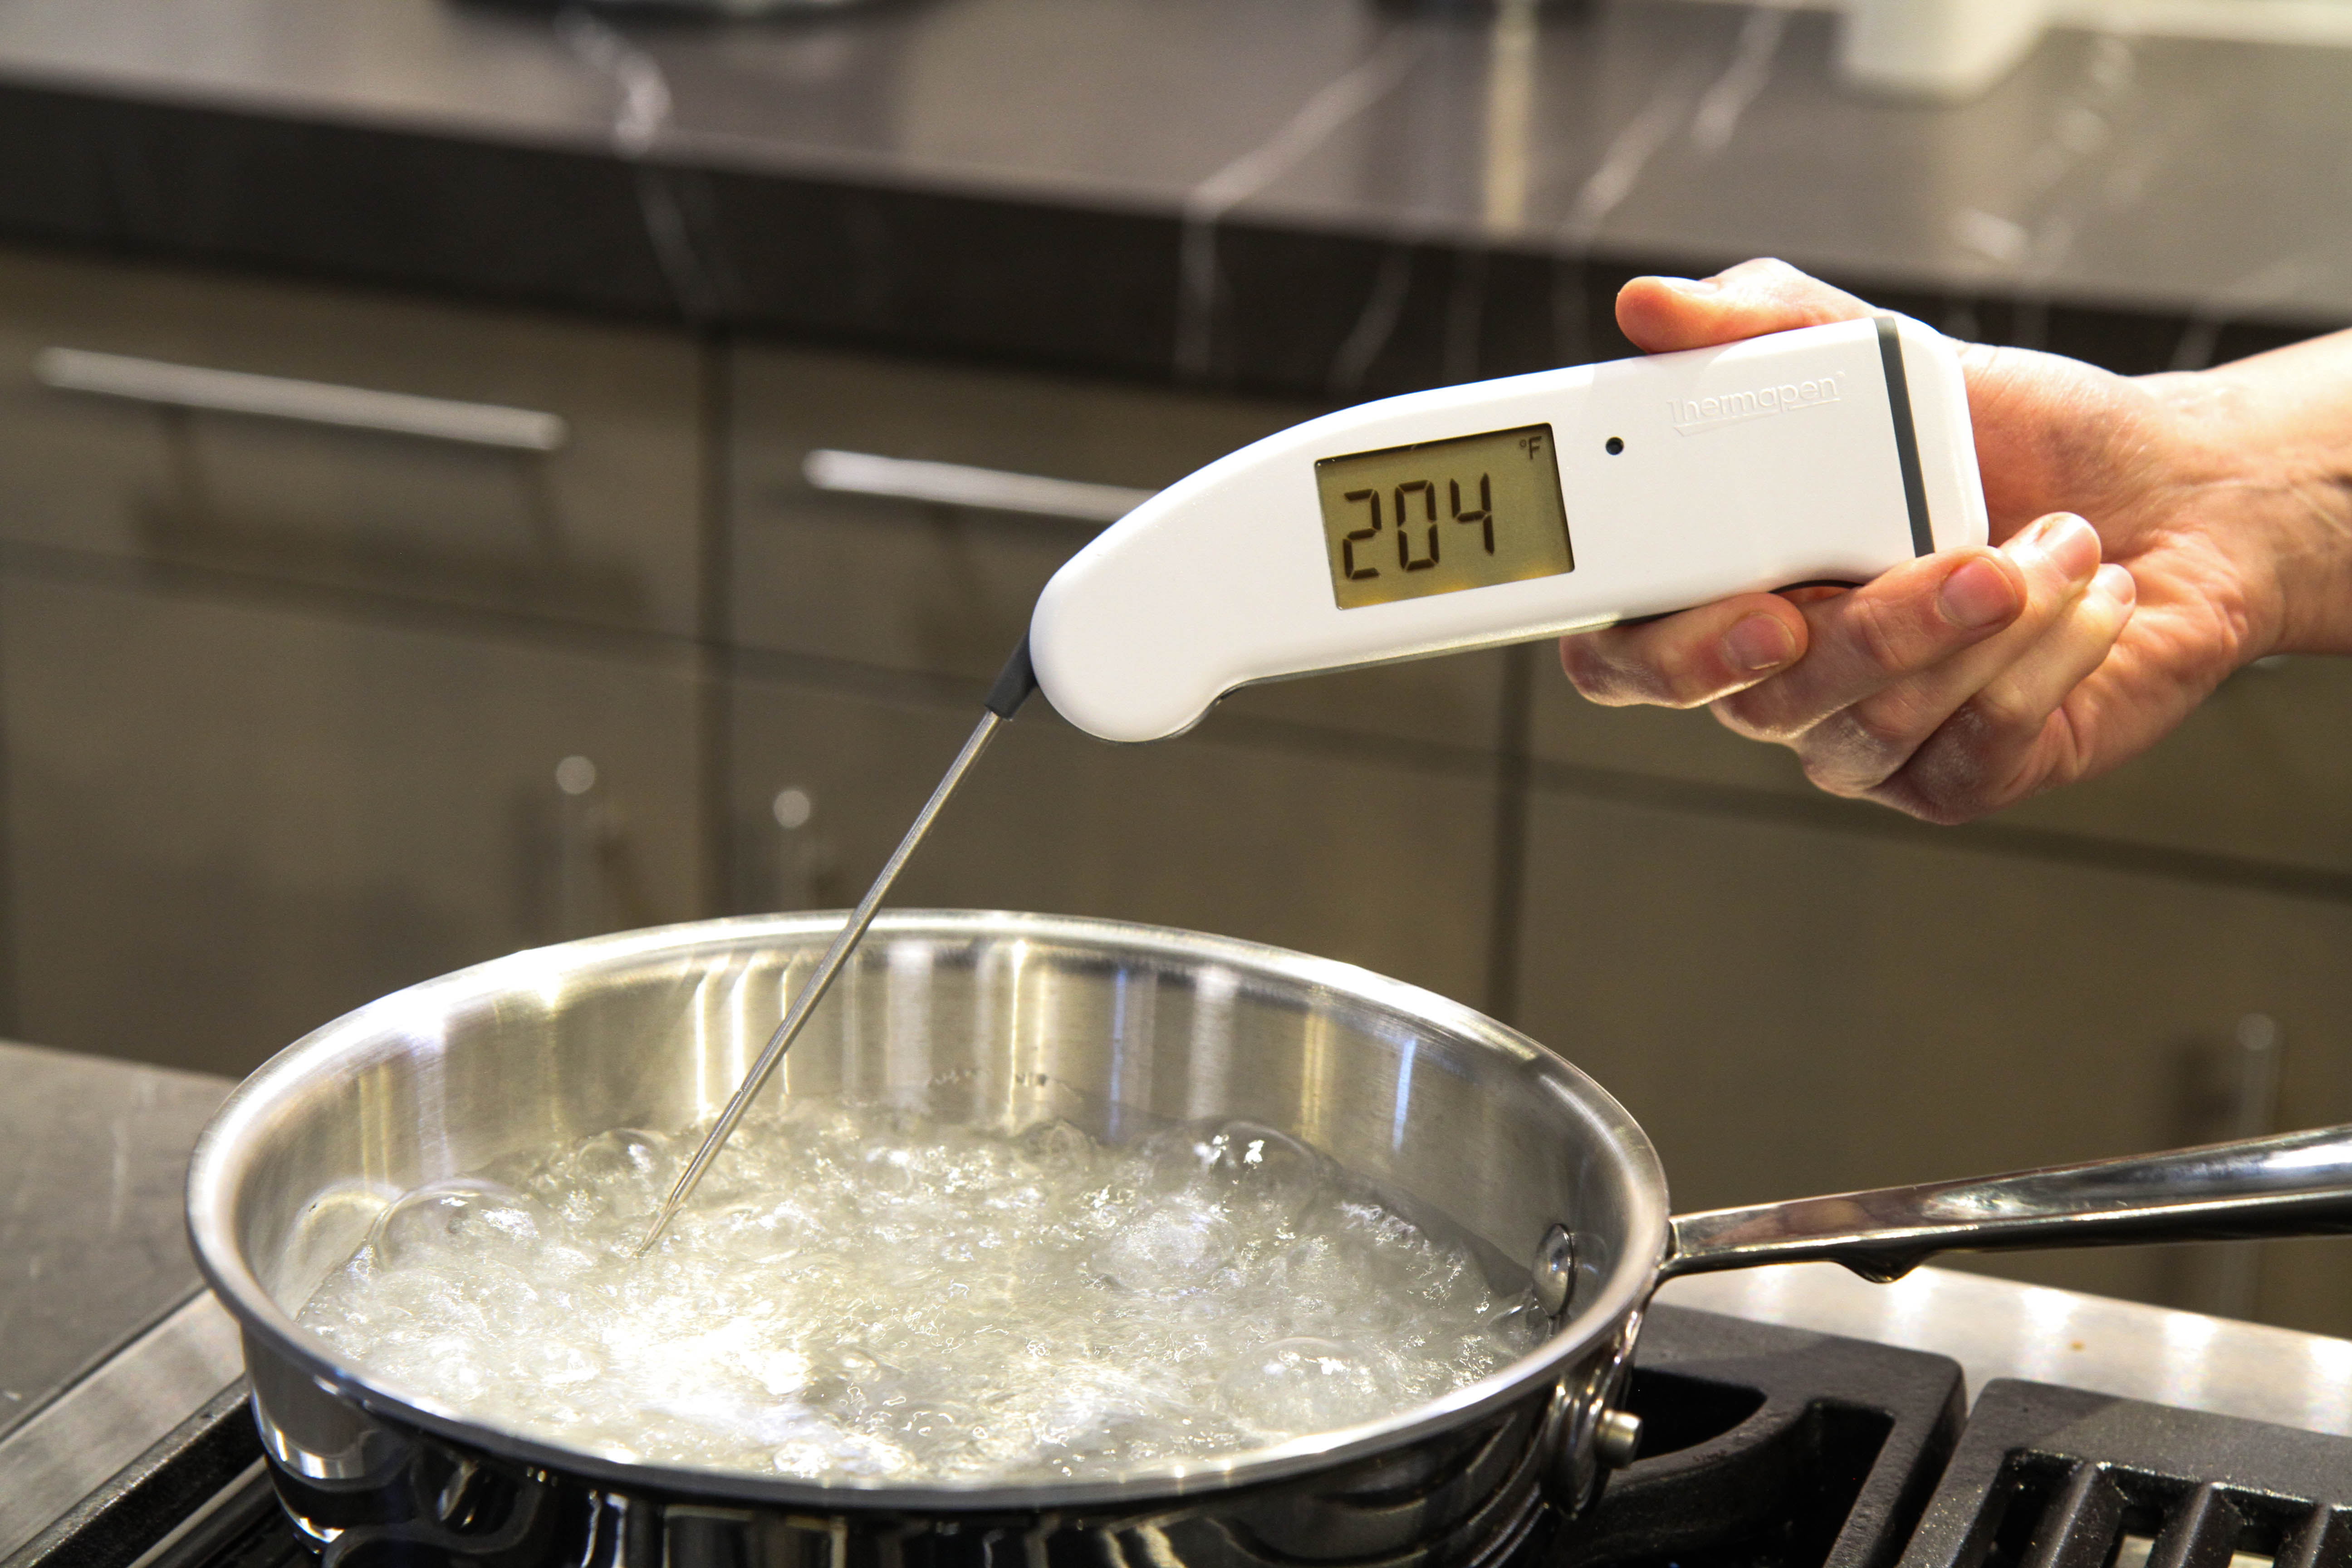 Testing Thermometers For Accuracy: Ice Bath Test & Boiling Water